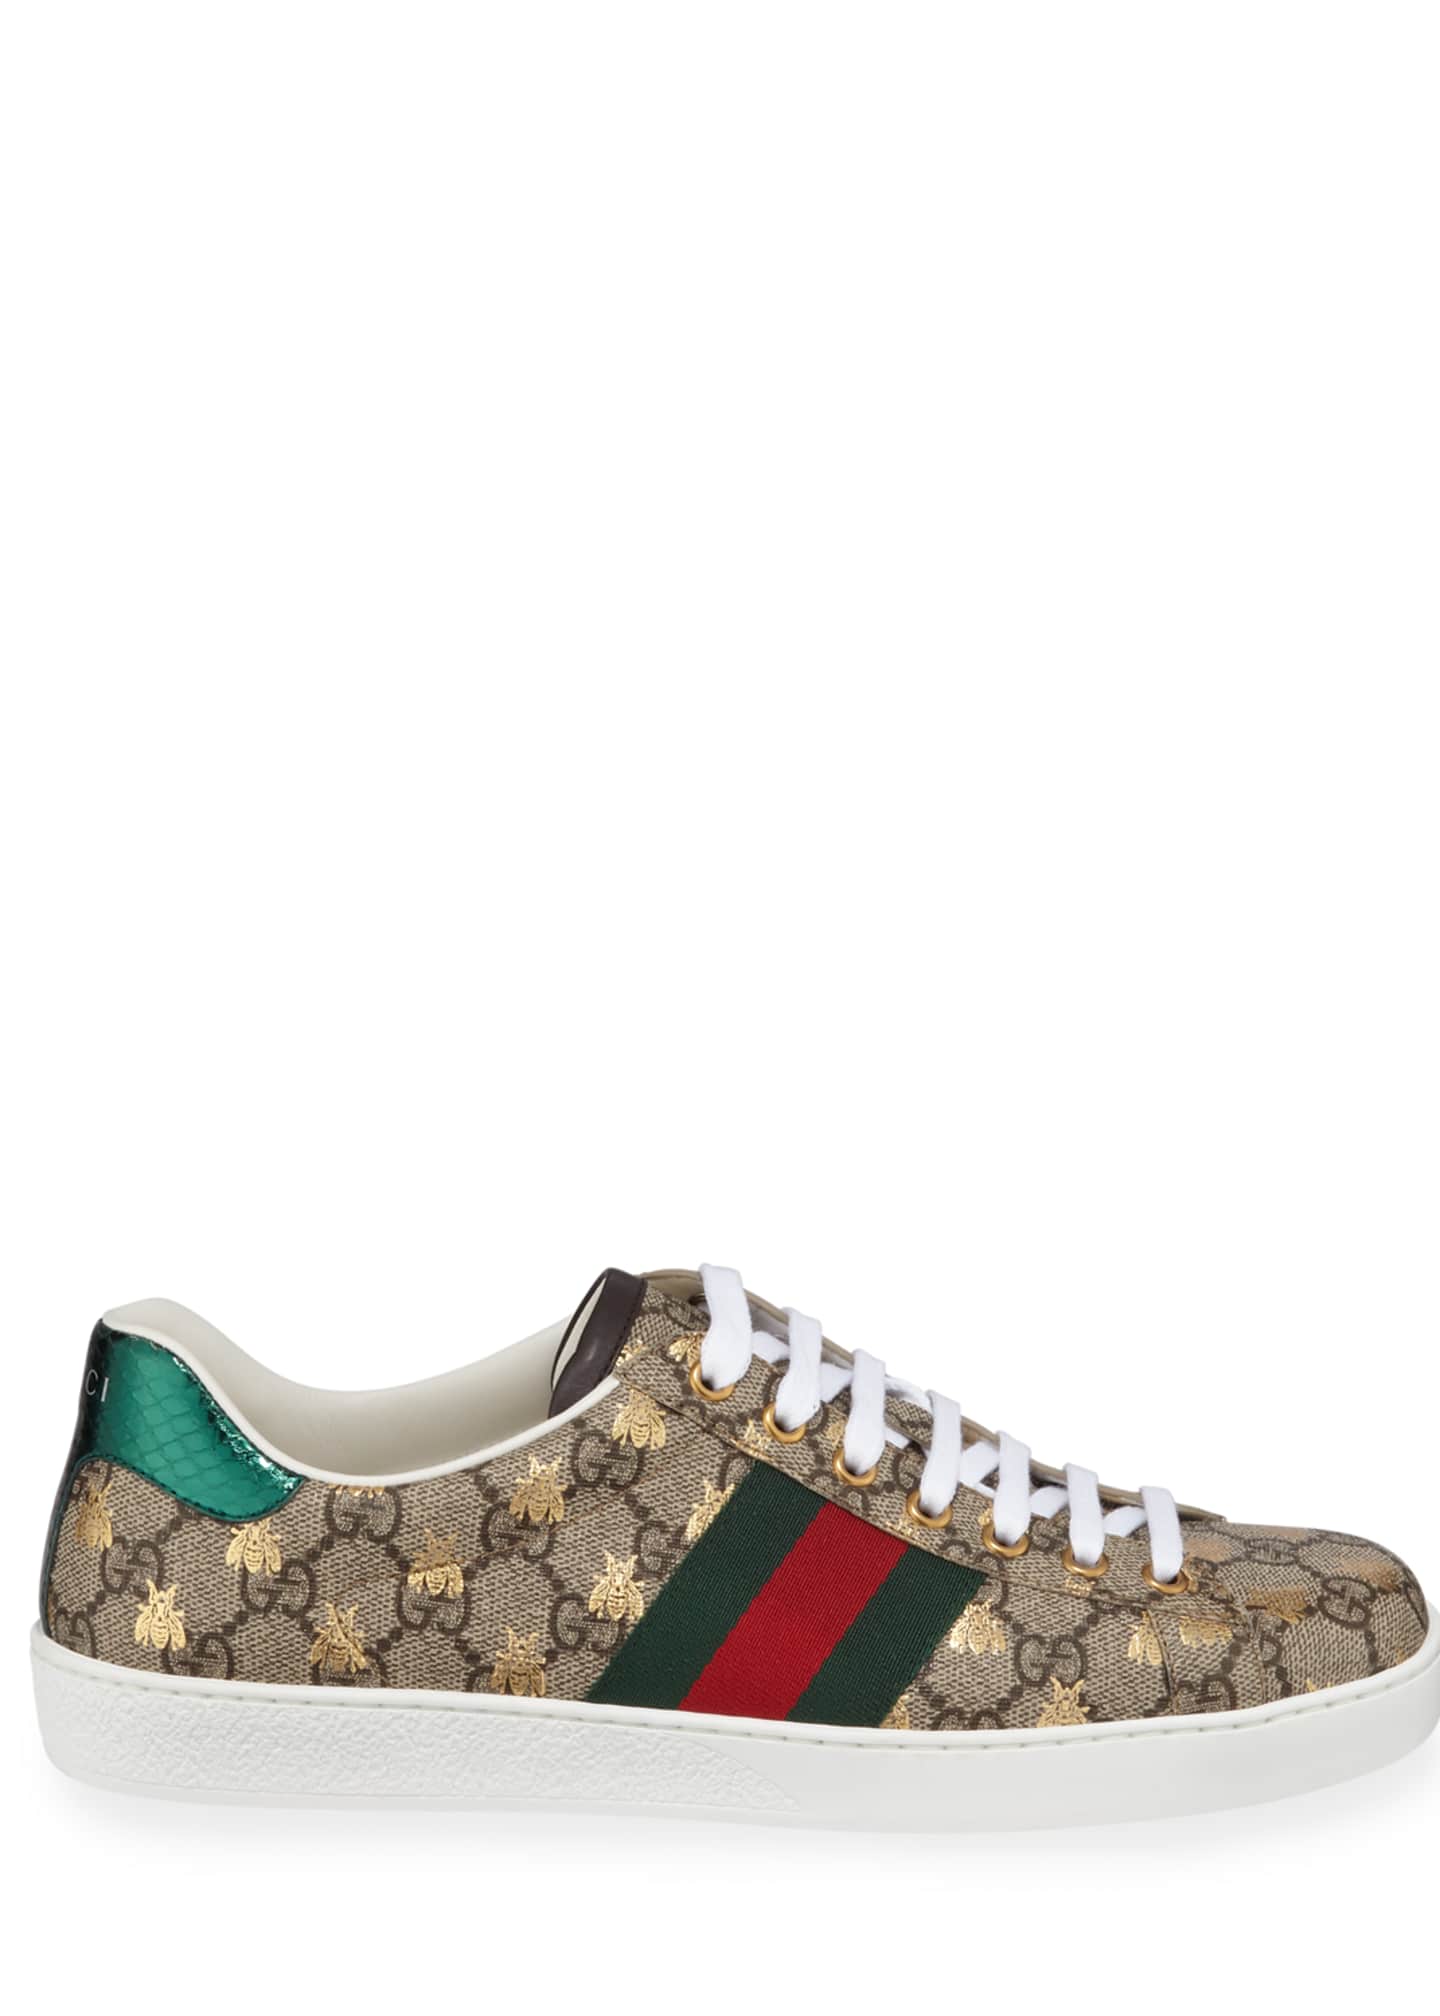 gucci camouflage shoes, OFF 76%,www 